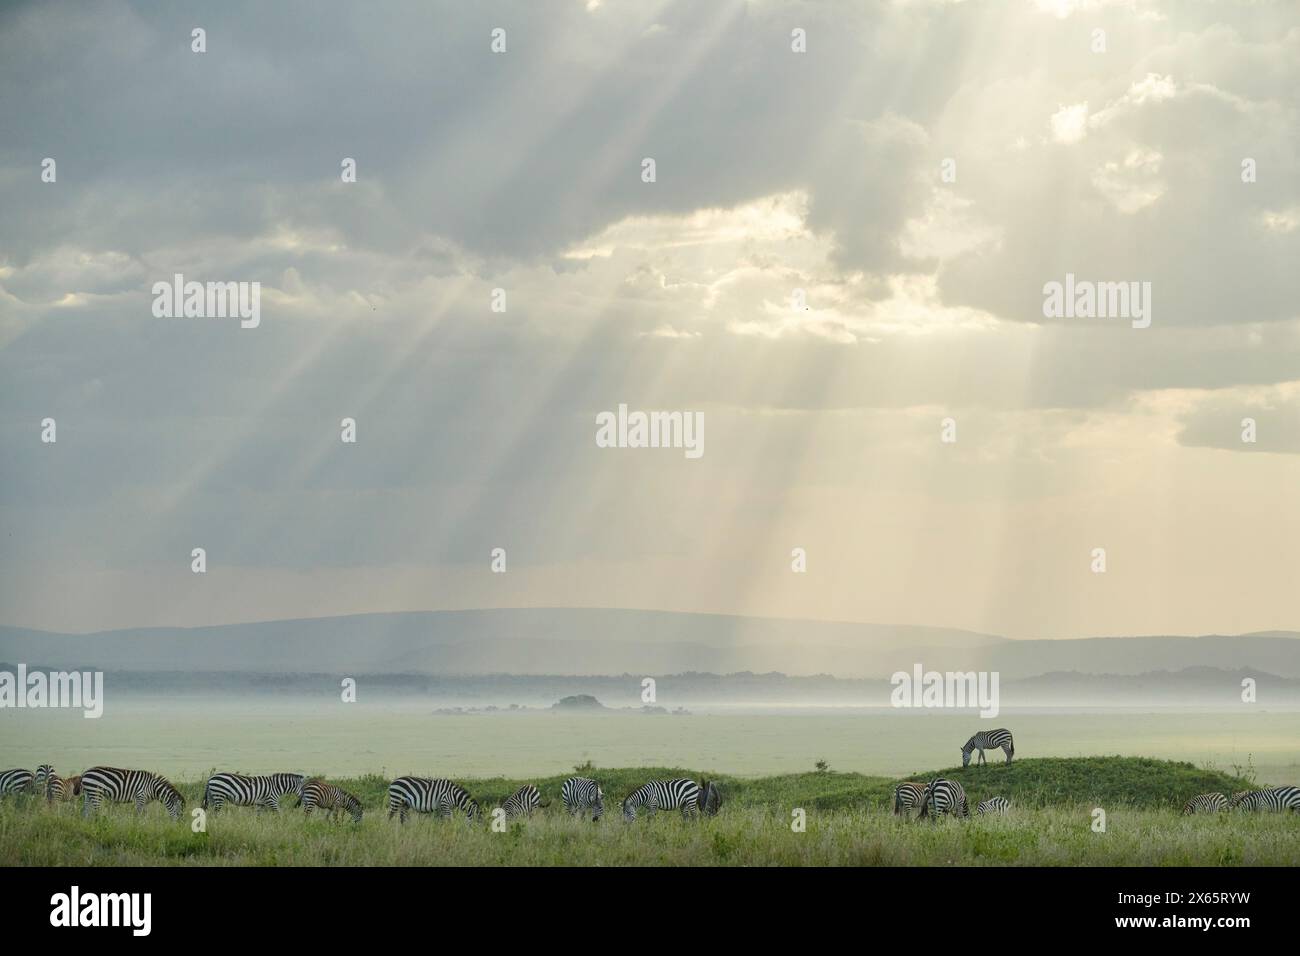 A zebra stands a top a small hill against sunbeams and the open Stock Photo